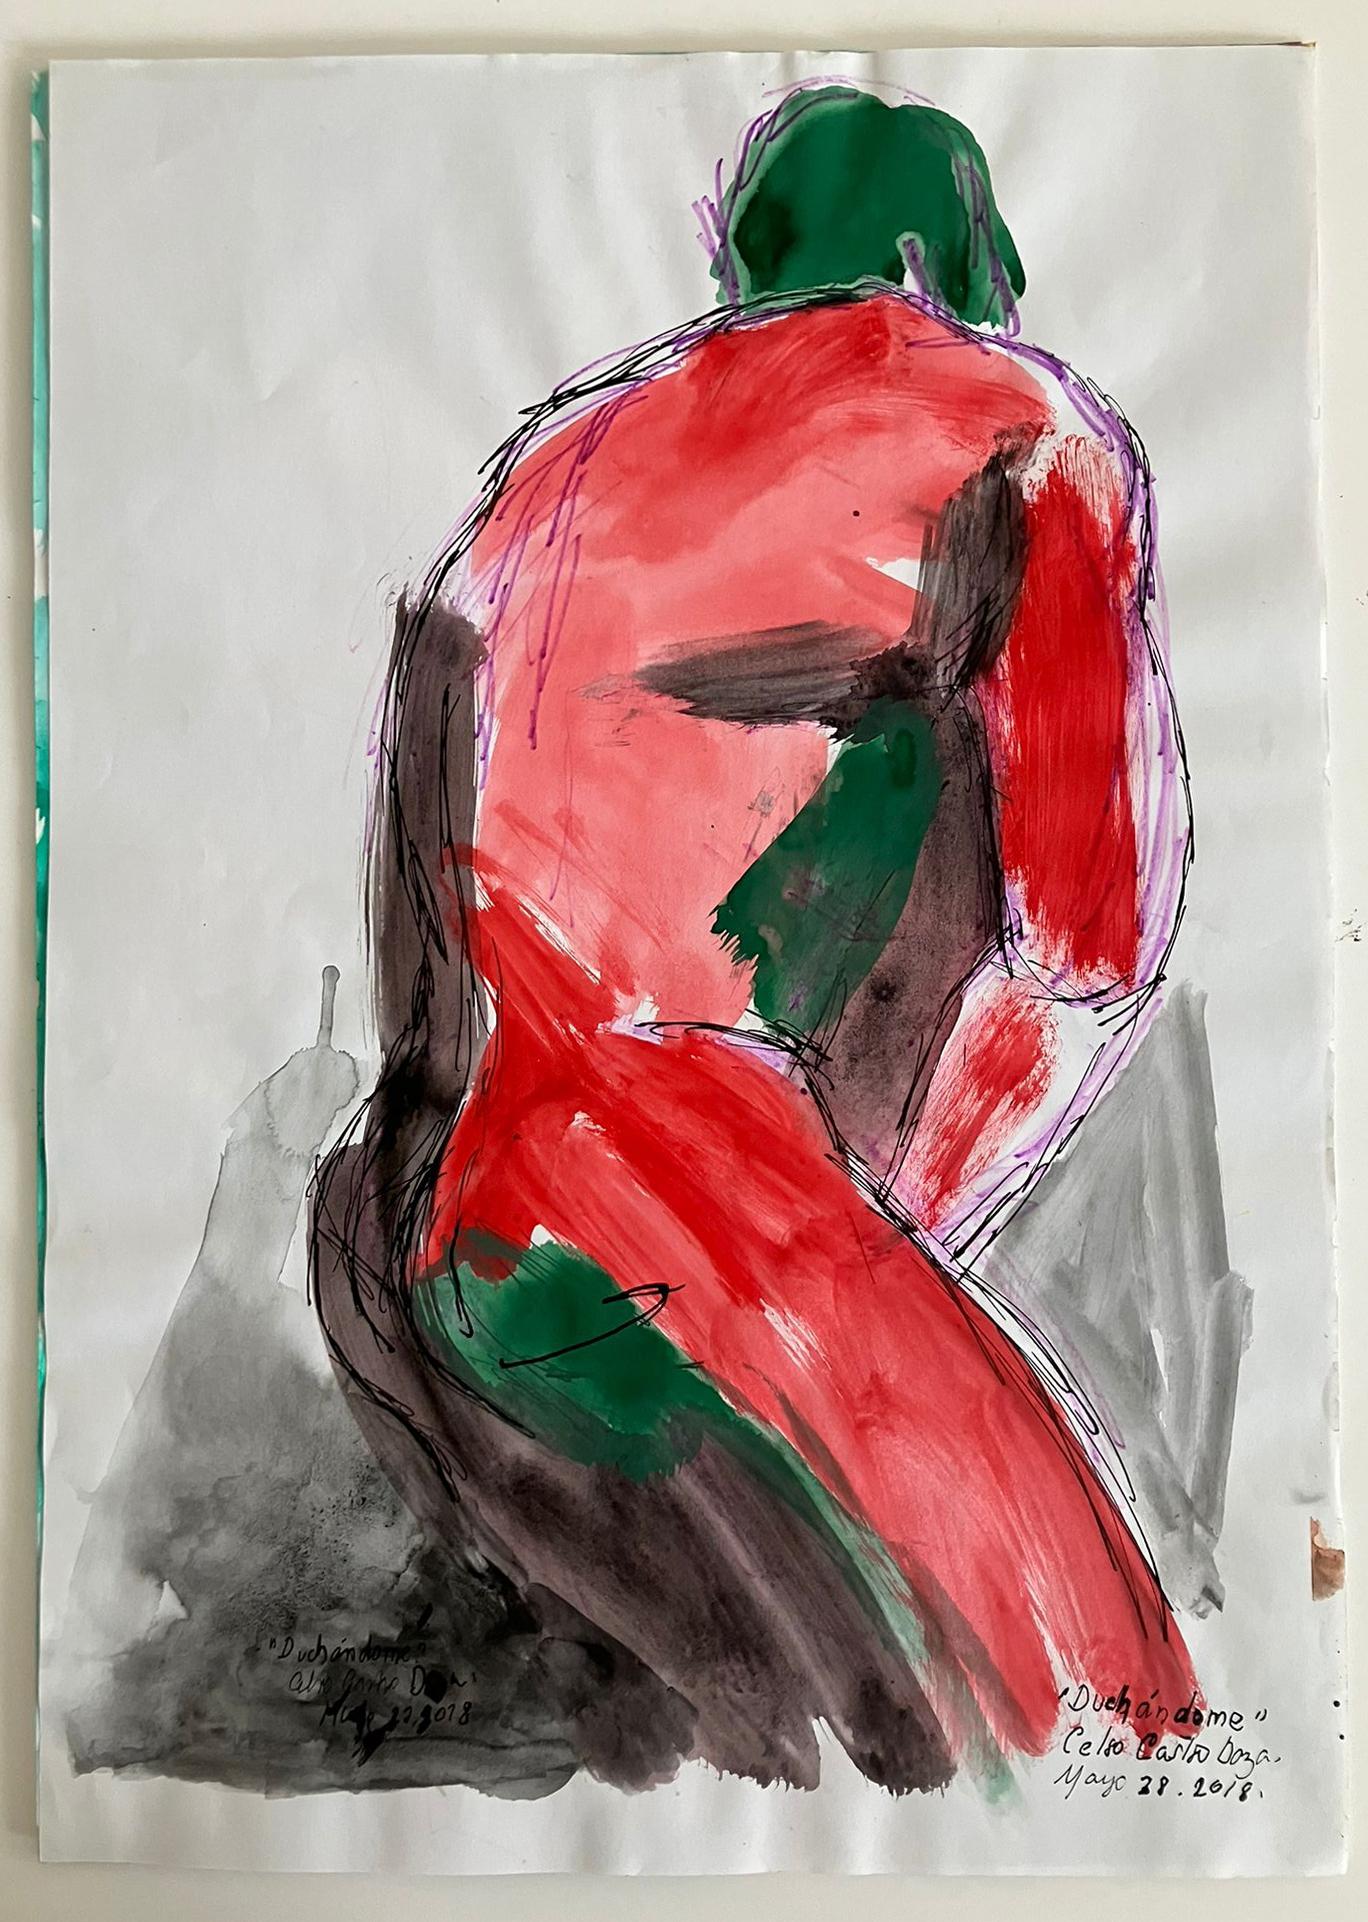  Duchándome Nude,  Series. Set of 4 Watercolors on archival paper. - Art by Celso José Castro Daza